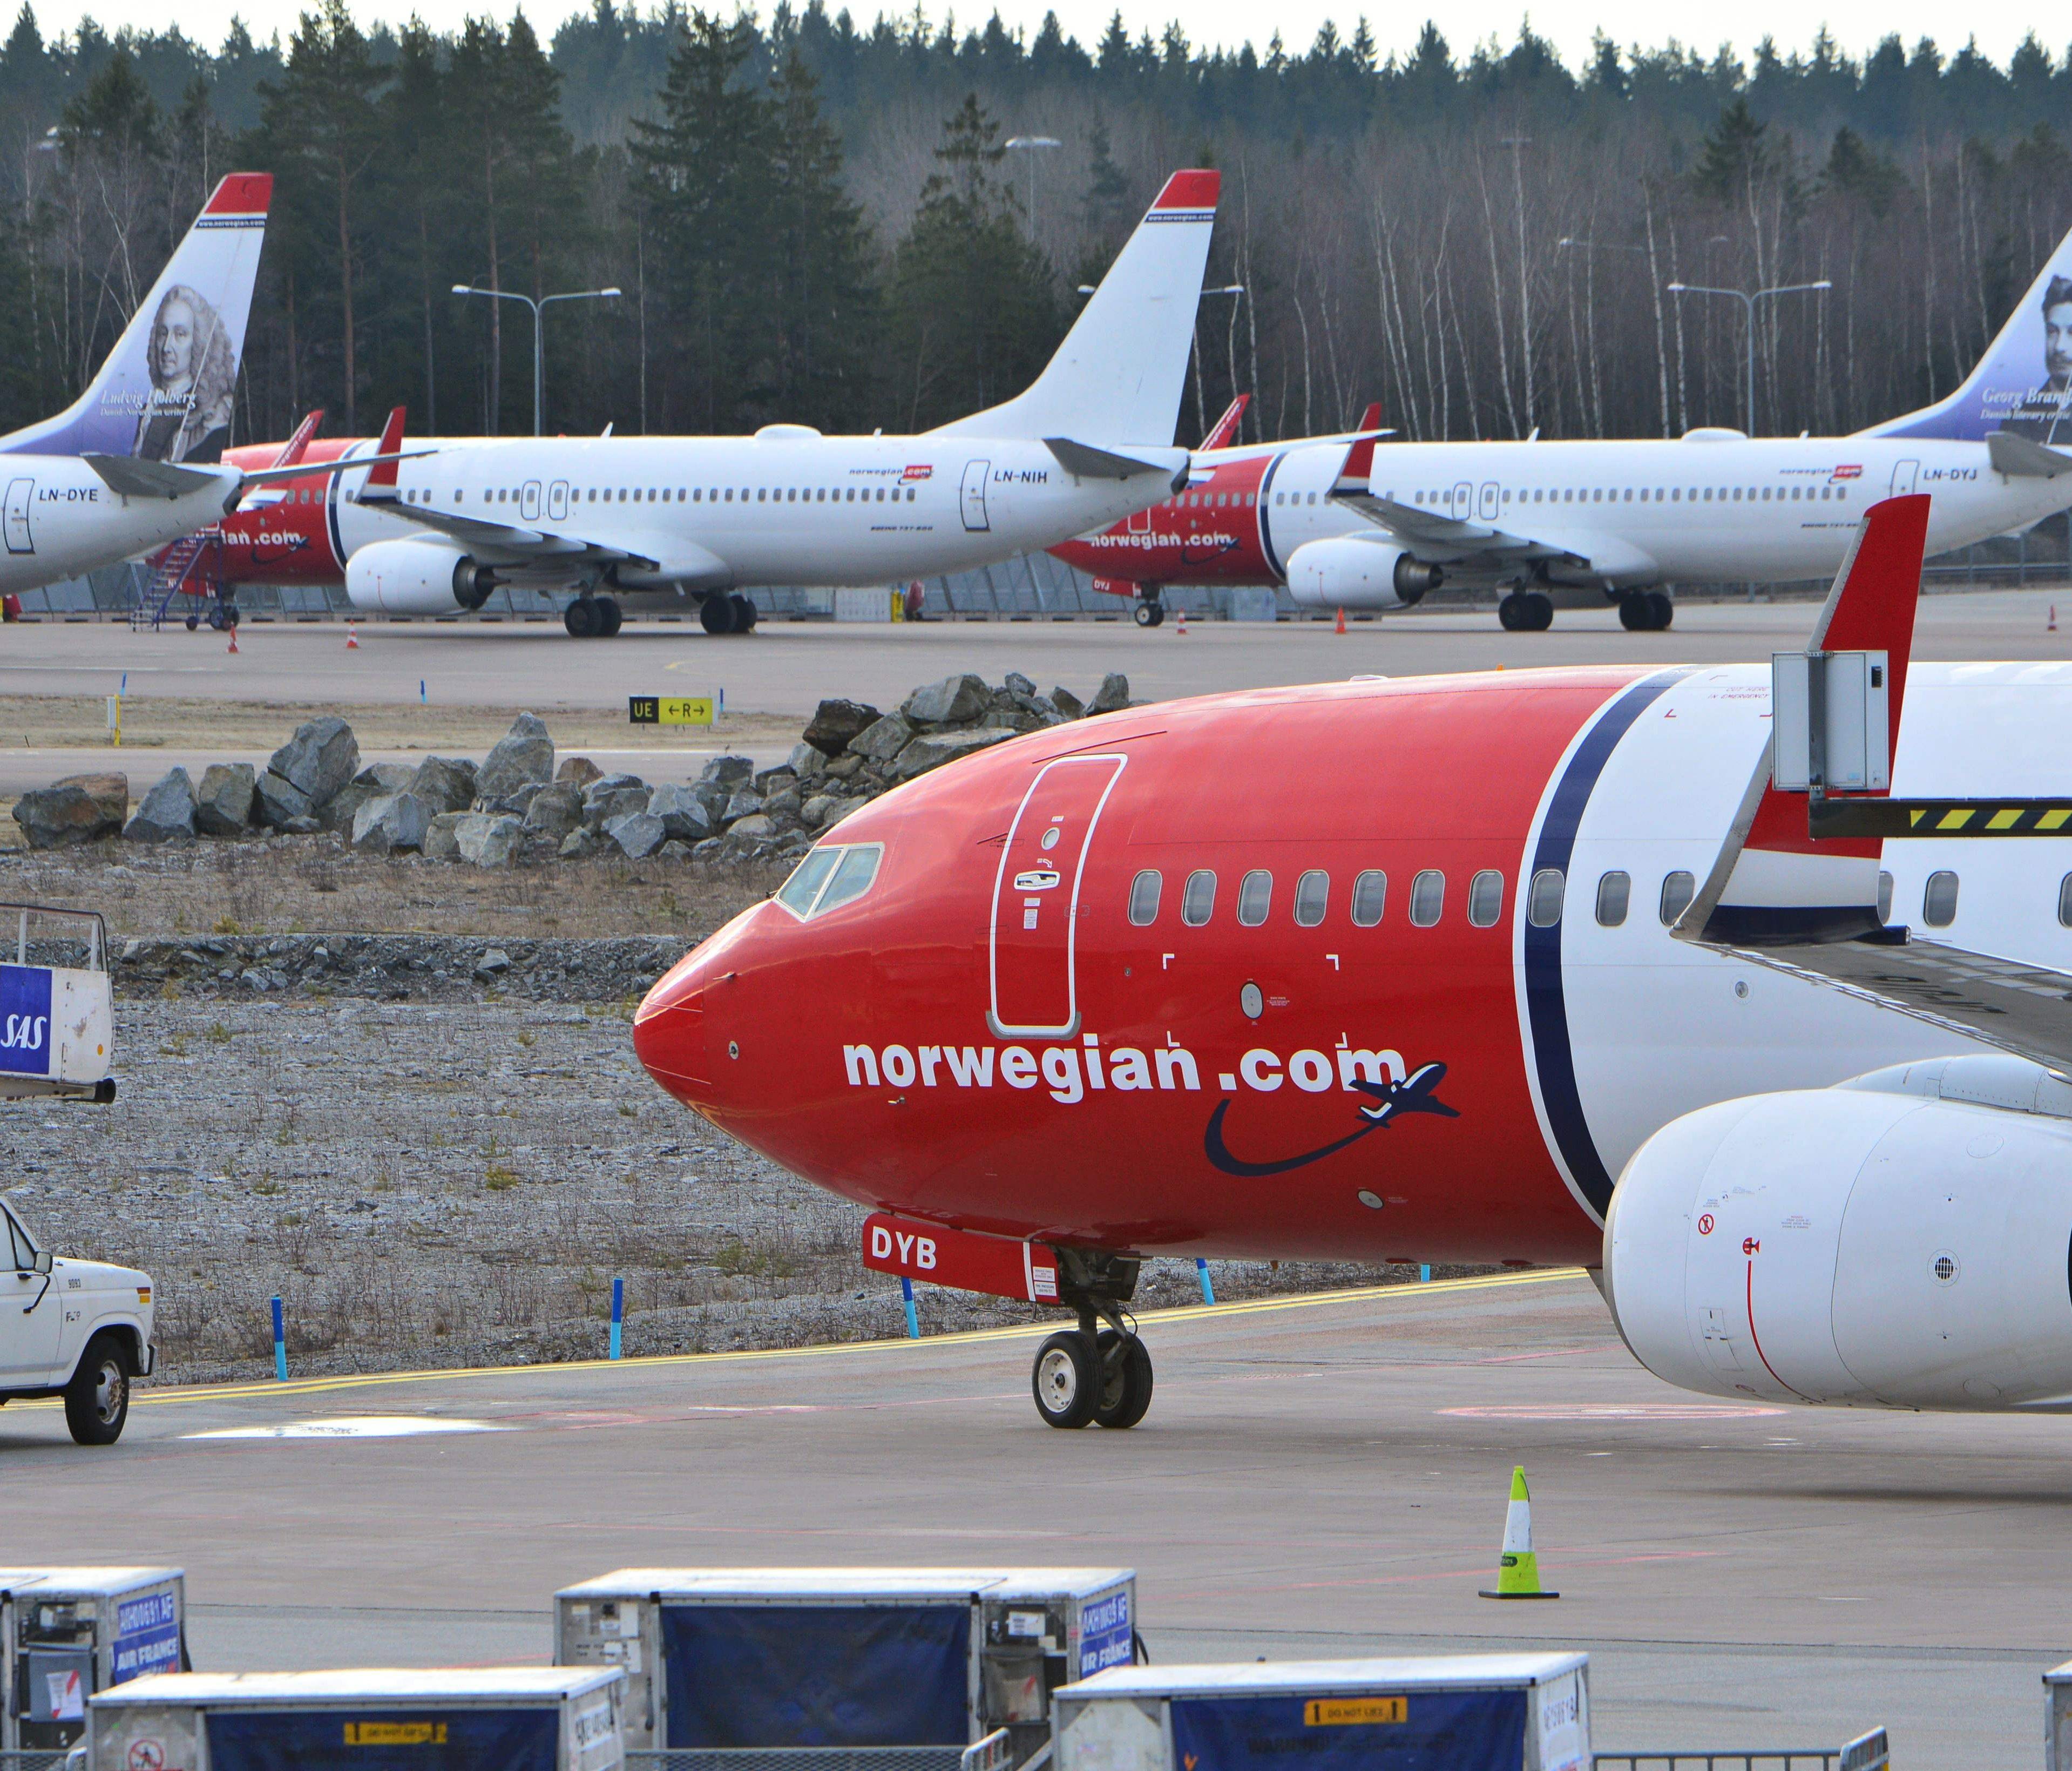 Norwegian Air Shuttle planes on the tarmac at Arlanda airport in Stockholm on March 5, 2015.